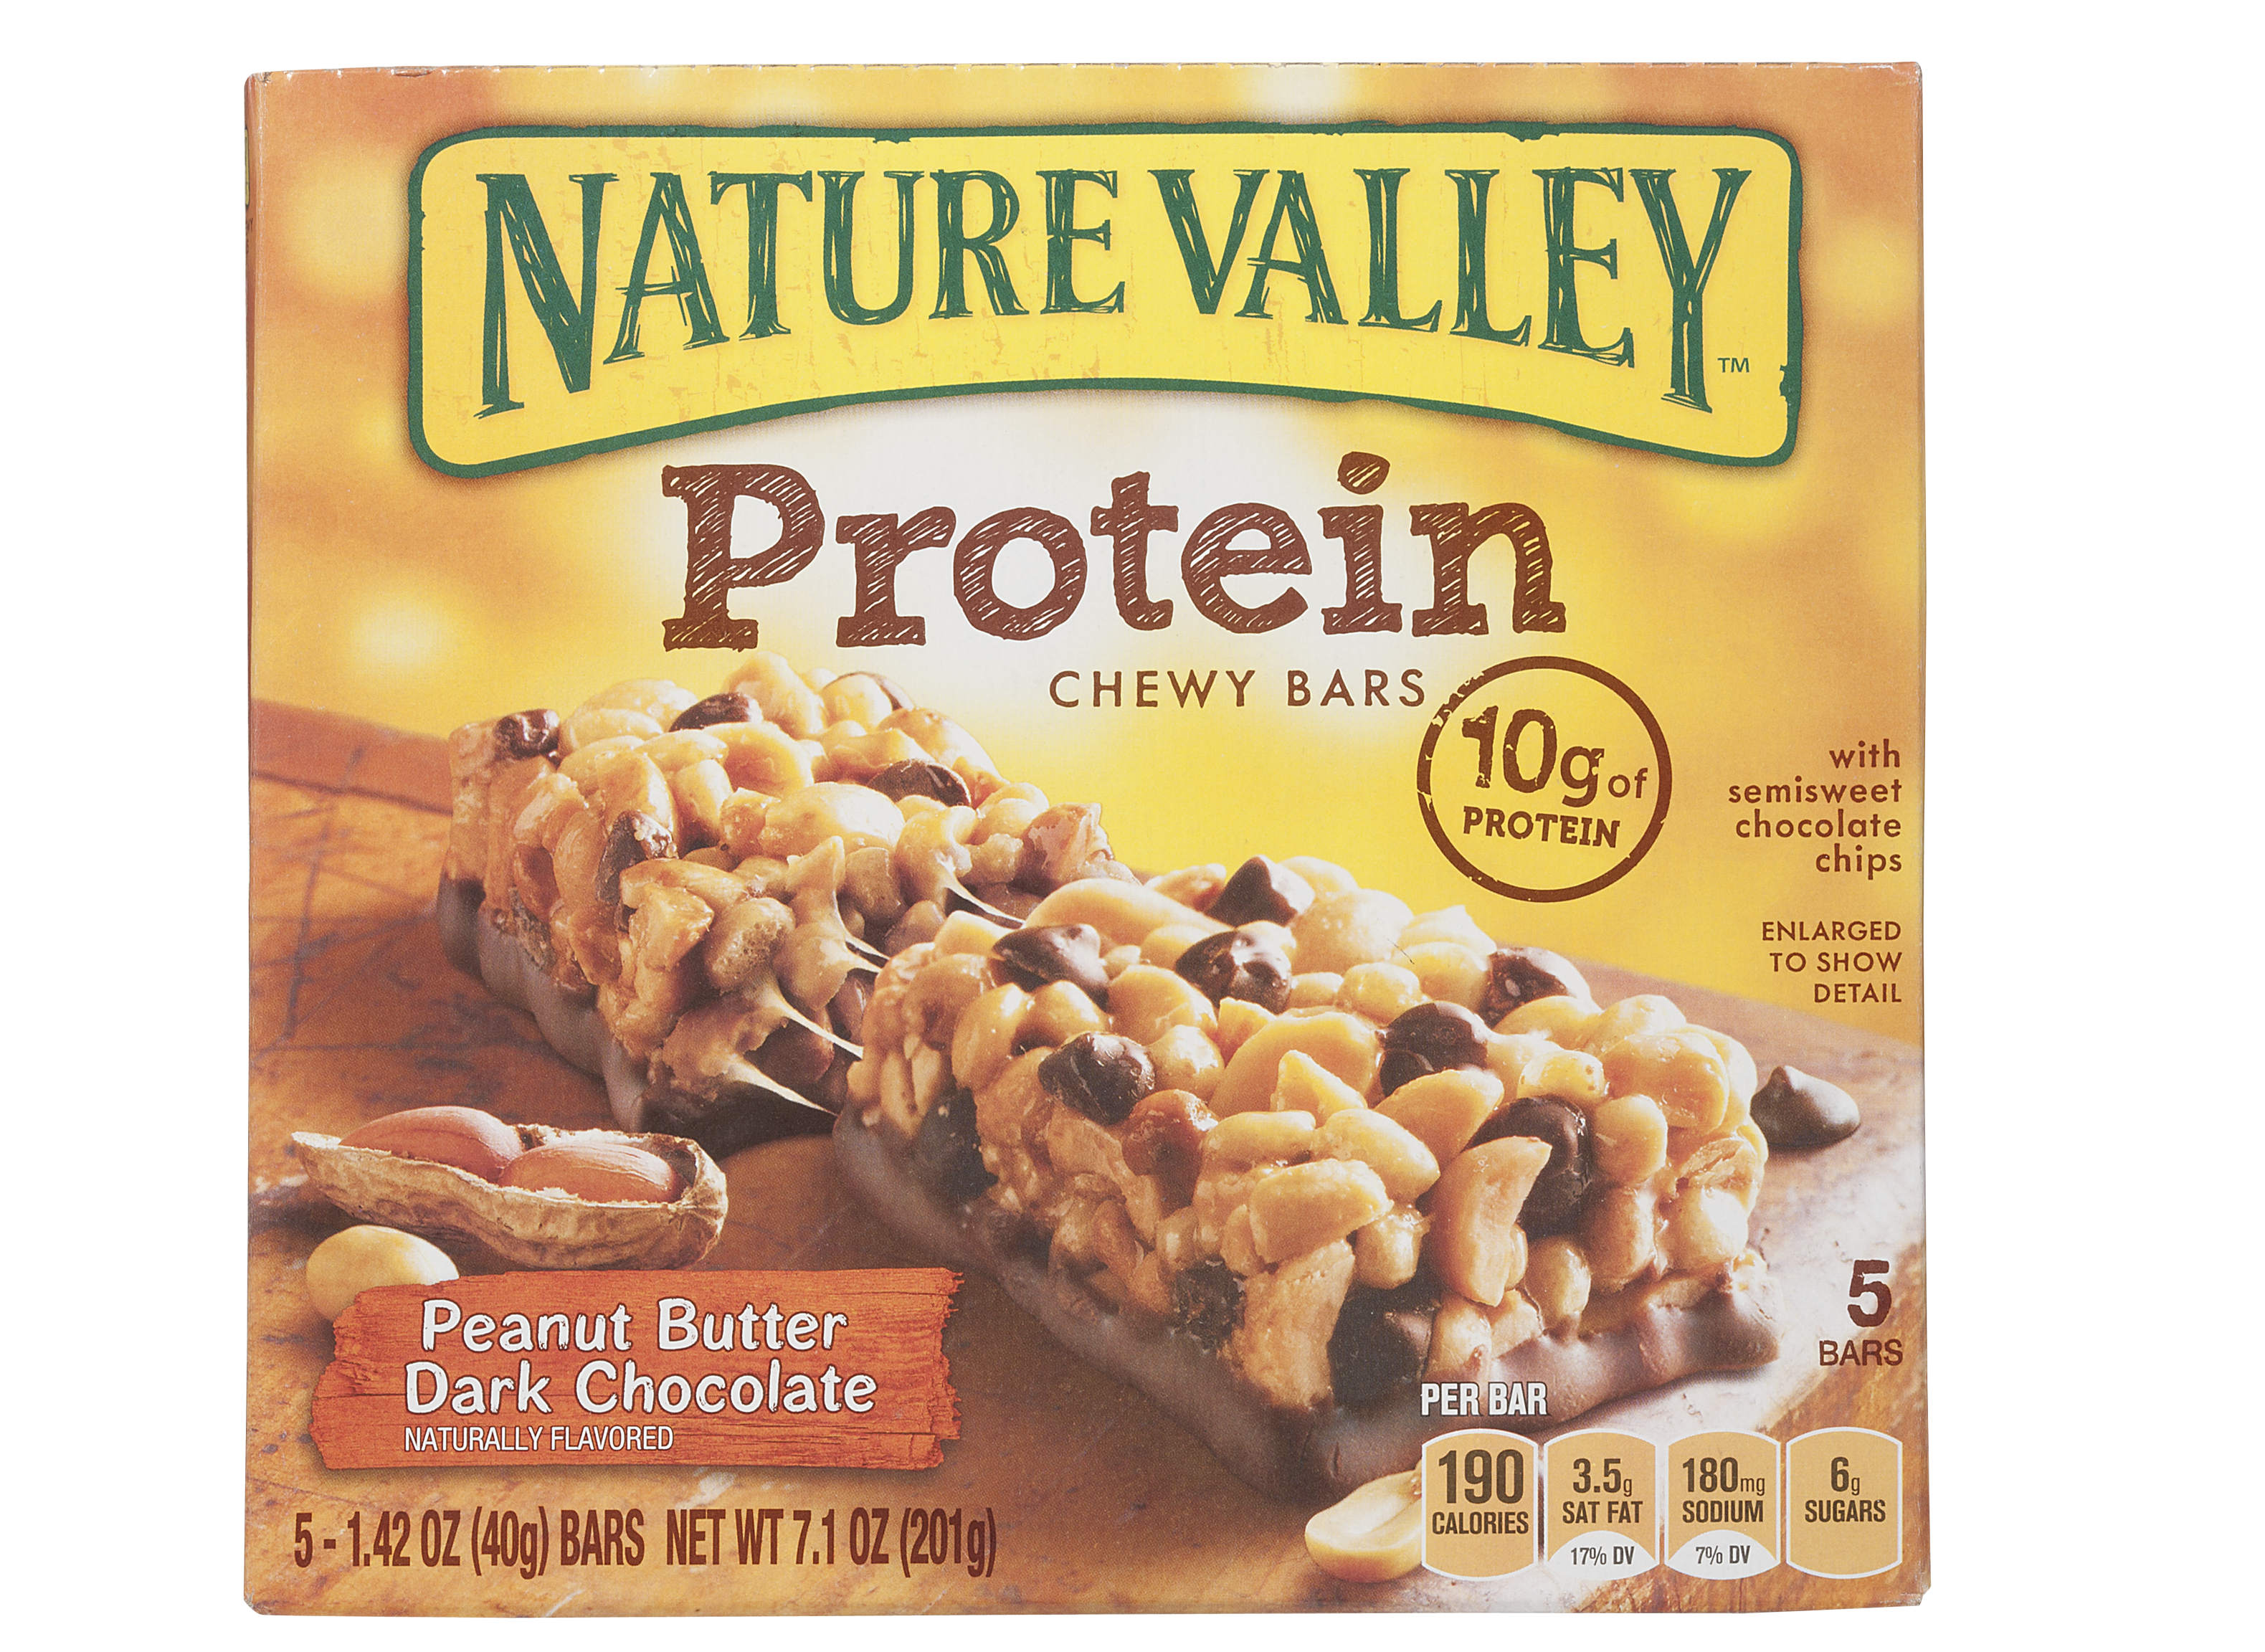 Nature Valley Protein Chewy Bars, Peanut Butter Dark Chocolate - 5 pack, 1.42 oz bars